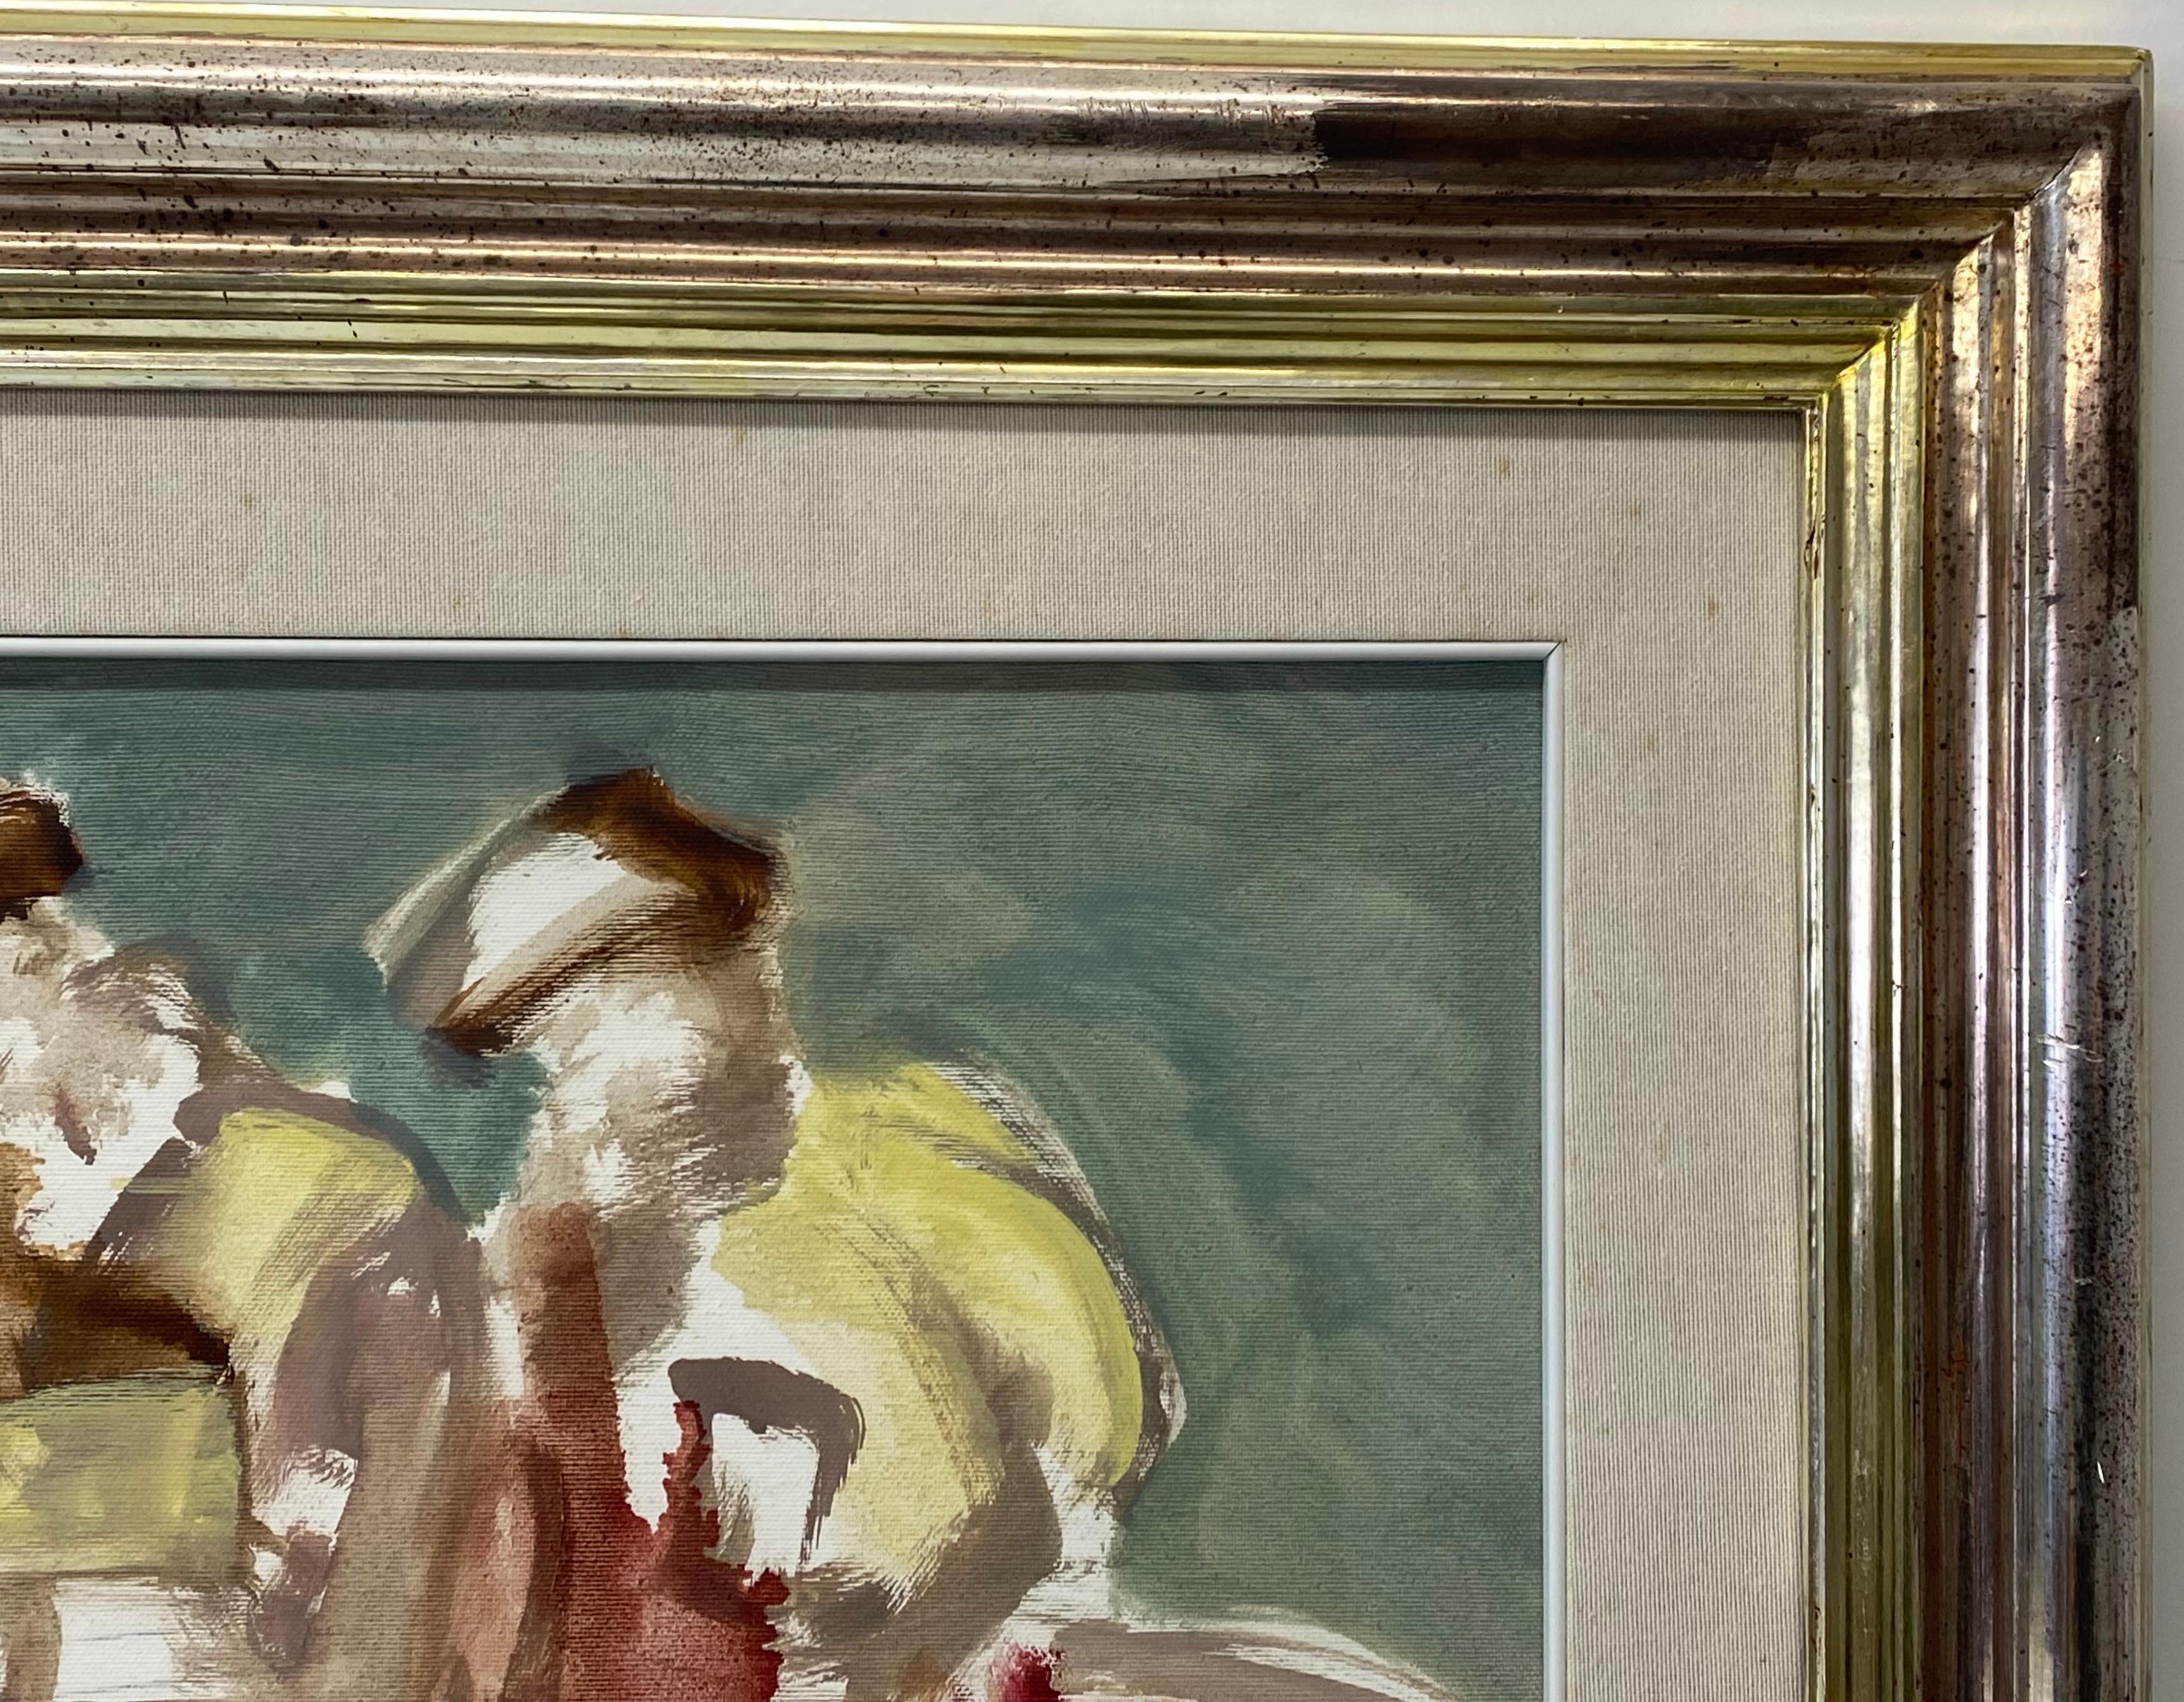 Vintage Abstract Figures on Horseback Original Oil Painting C.1983

Fine original oil on canvas under glass

We are unable to make out the signature

A bit of old fashioned detective work by the new owner may turn up a listed artist

Original oil on